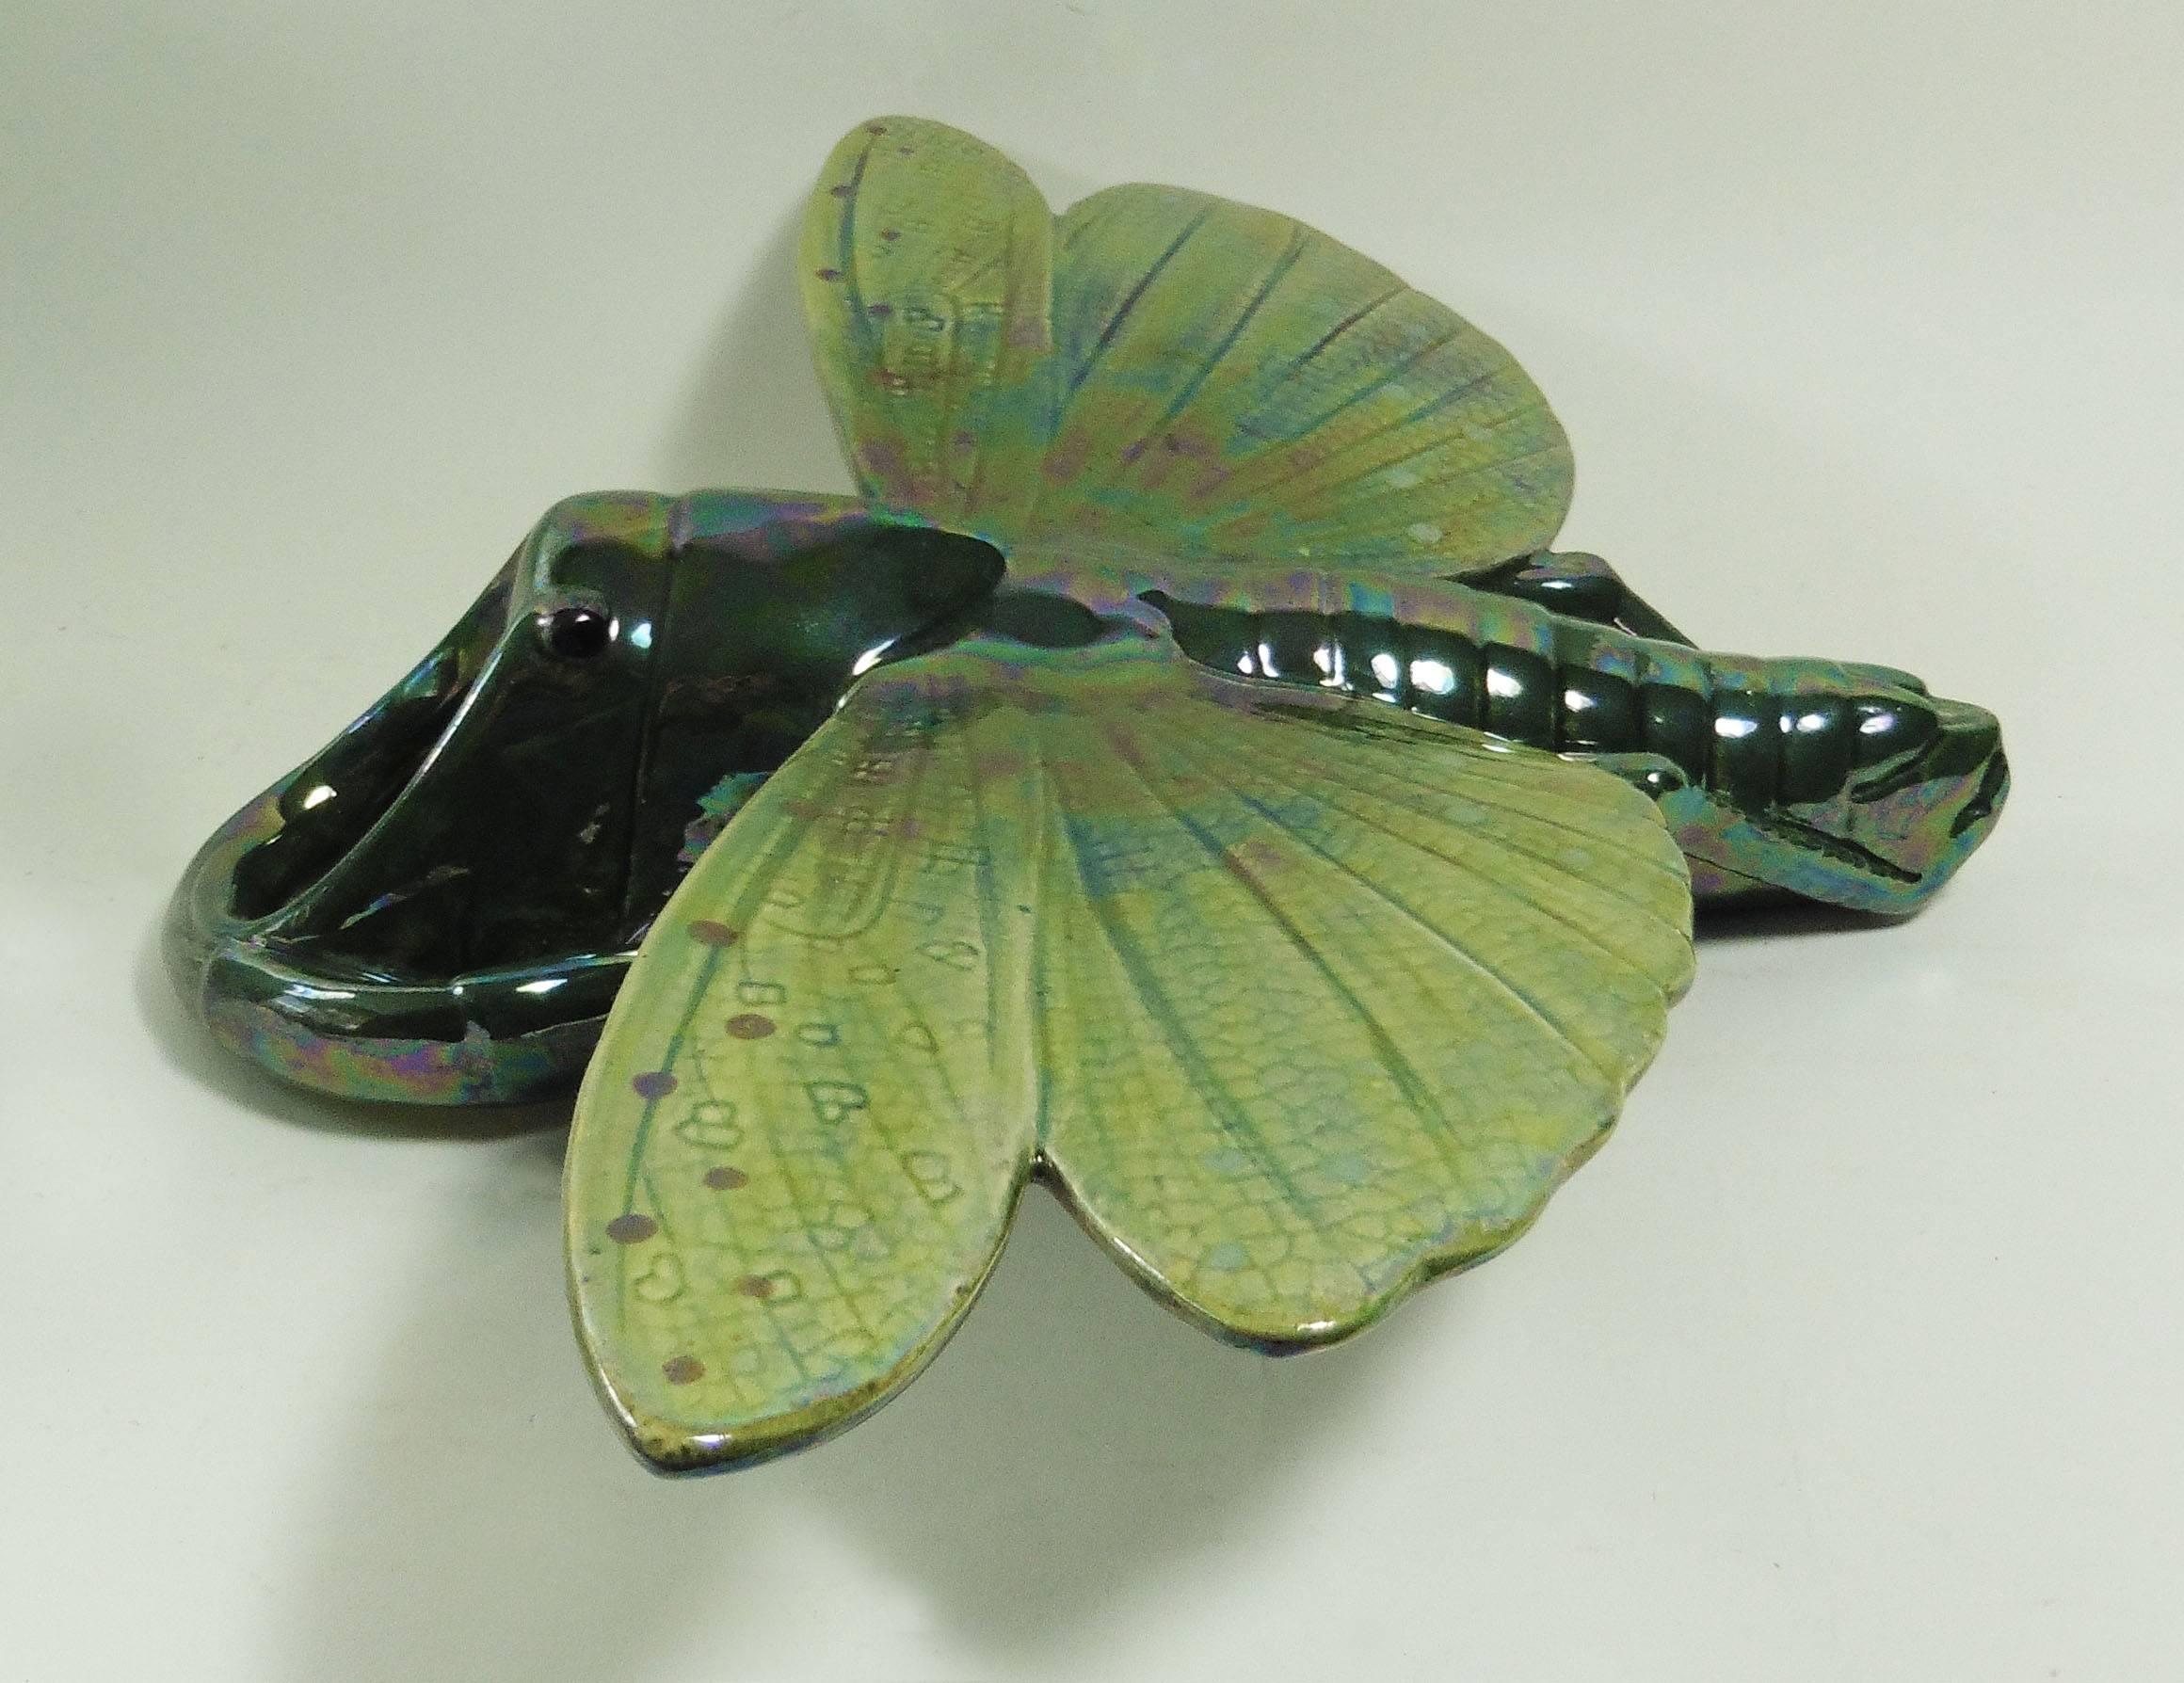 Large Majolica wall pocket insect in a green iridescent color, circa 1910.
Model number 4401.